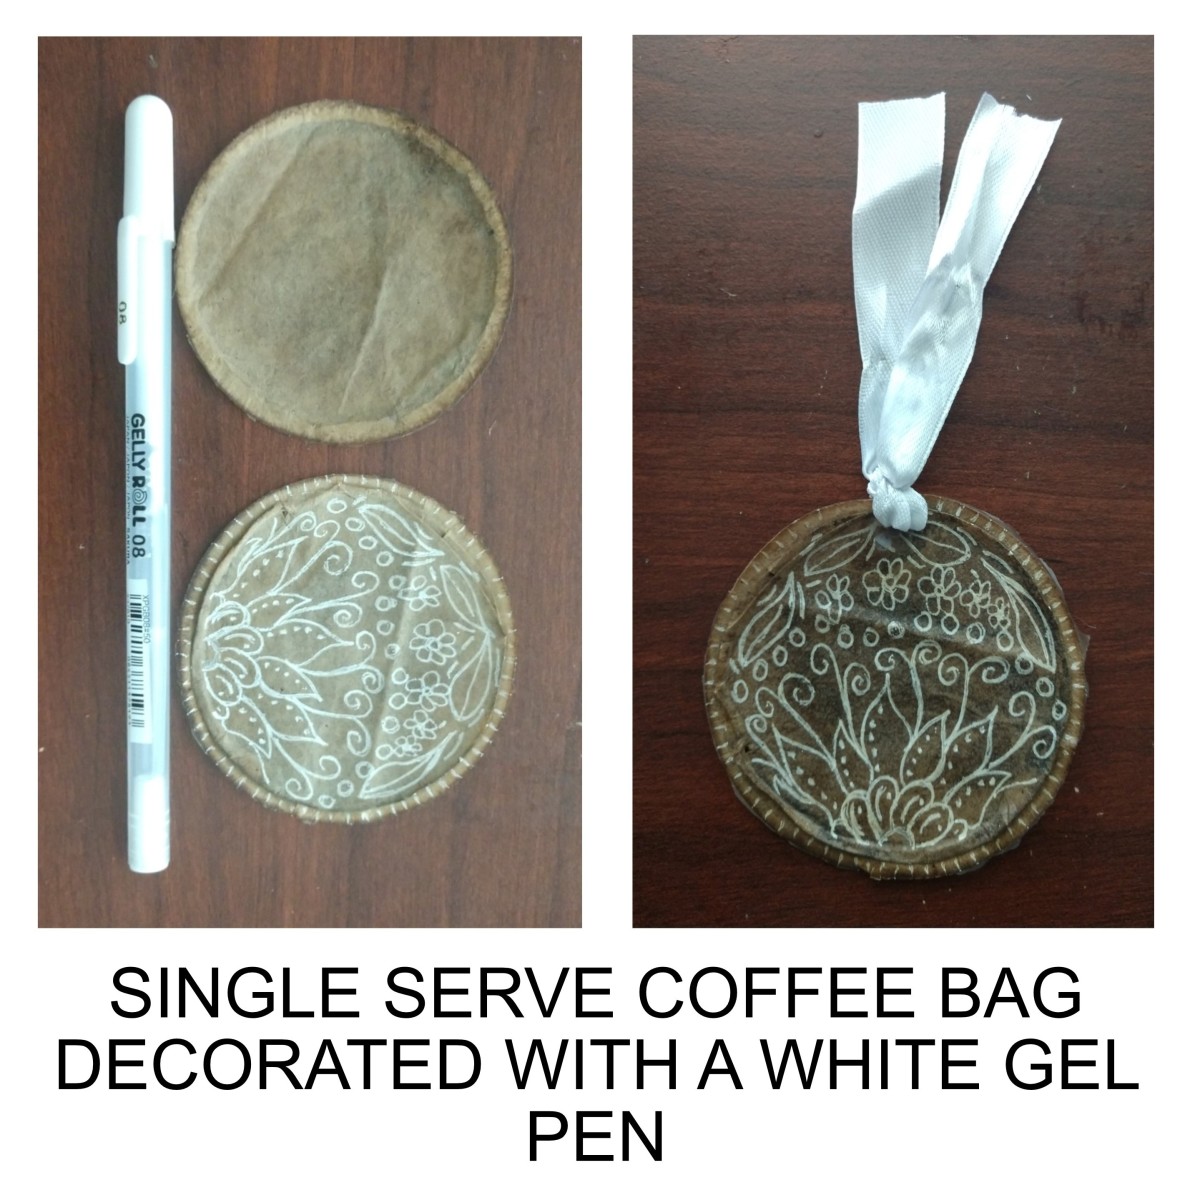 A single serve coffee pouch. Treat the paper with the pasta starch first before decorating. It will prevent the pen ink from running. This is a pouch and the pasta starch will glue the front and back of the pouch together.